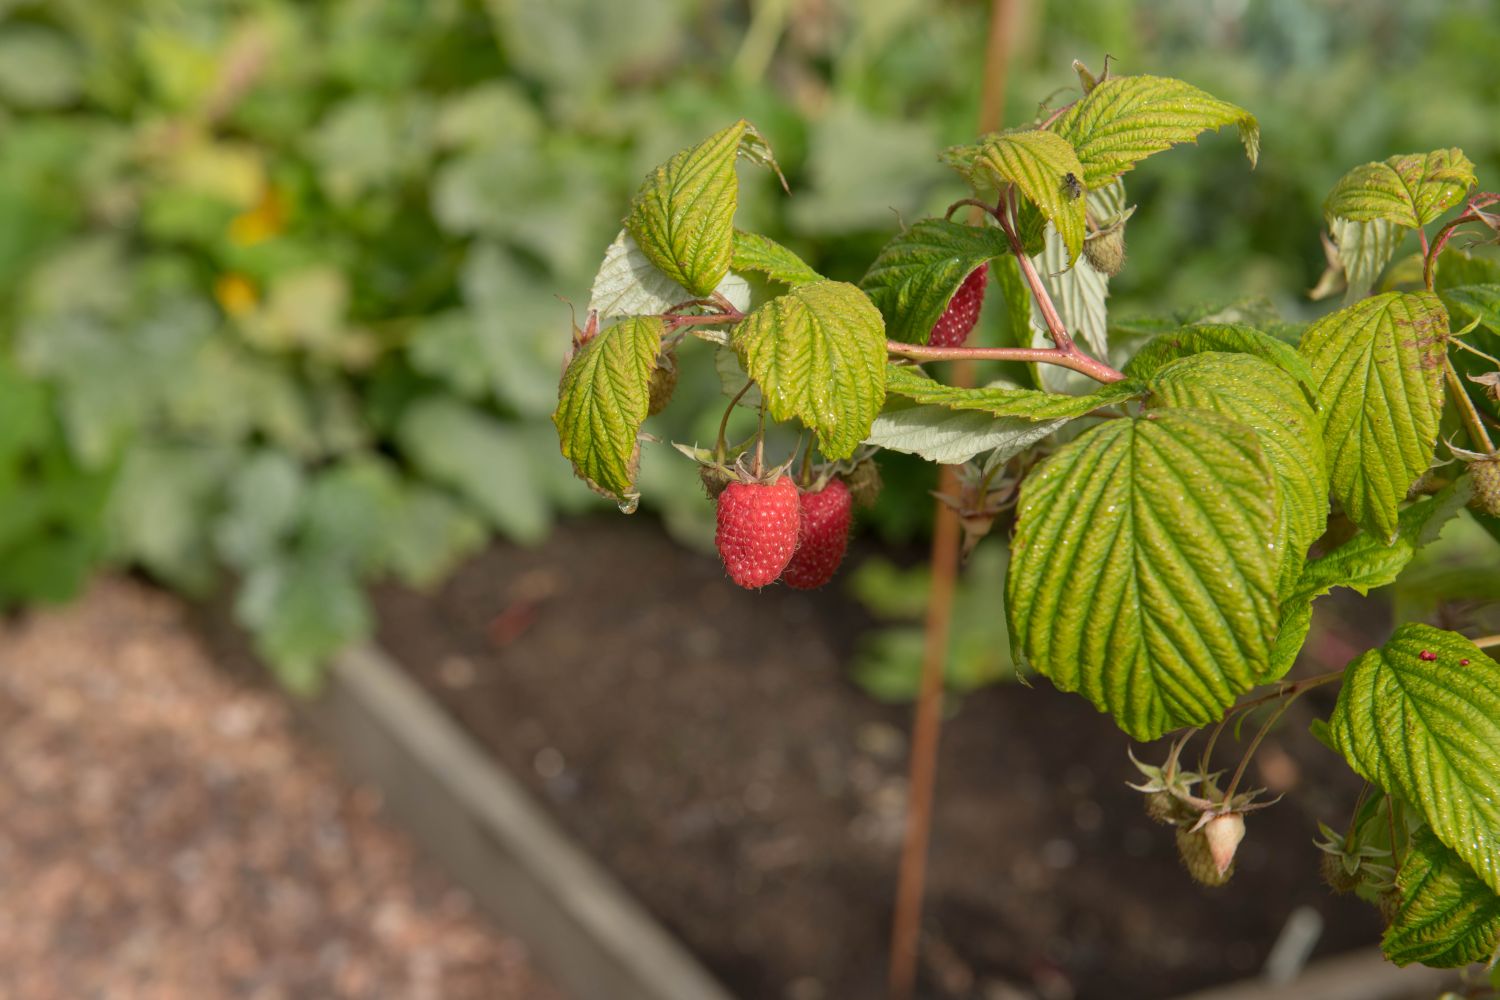 Image of Loosening the roots of a raspberry plant